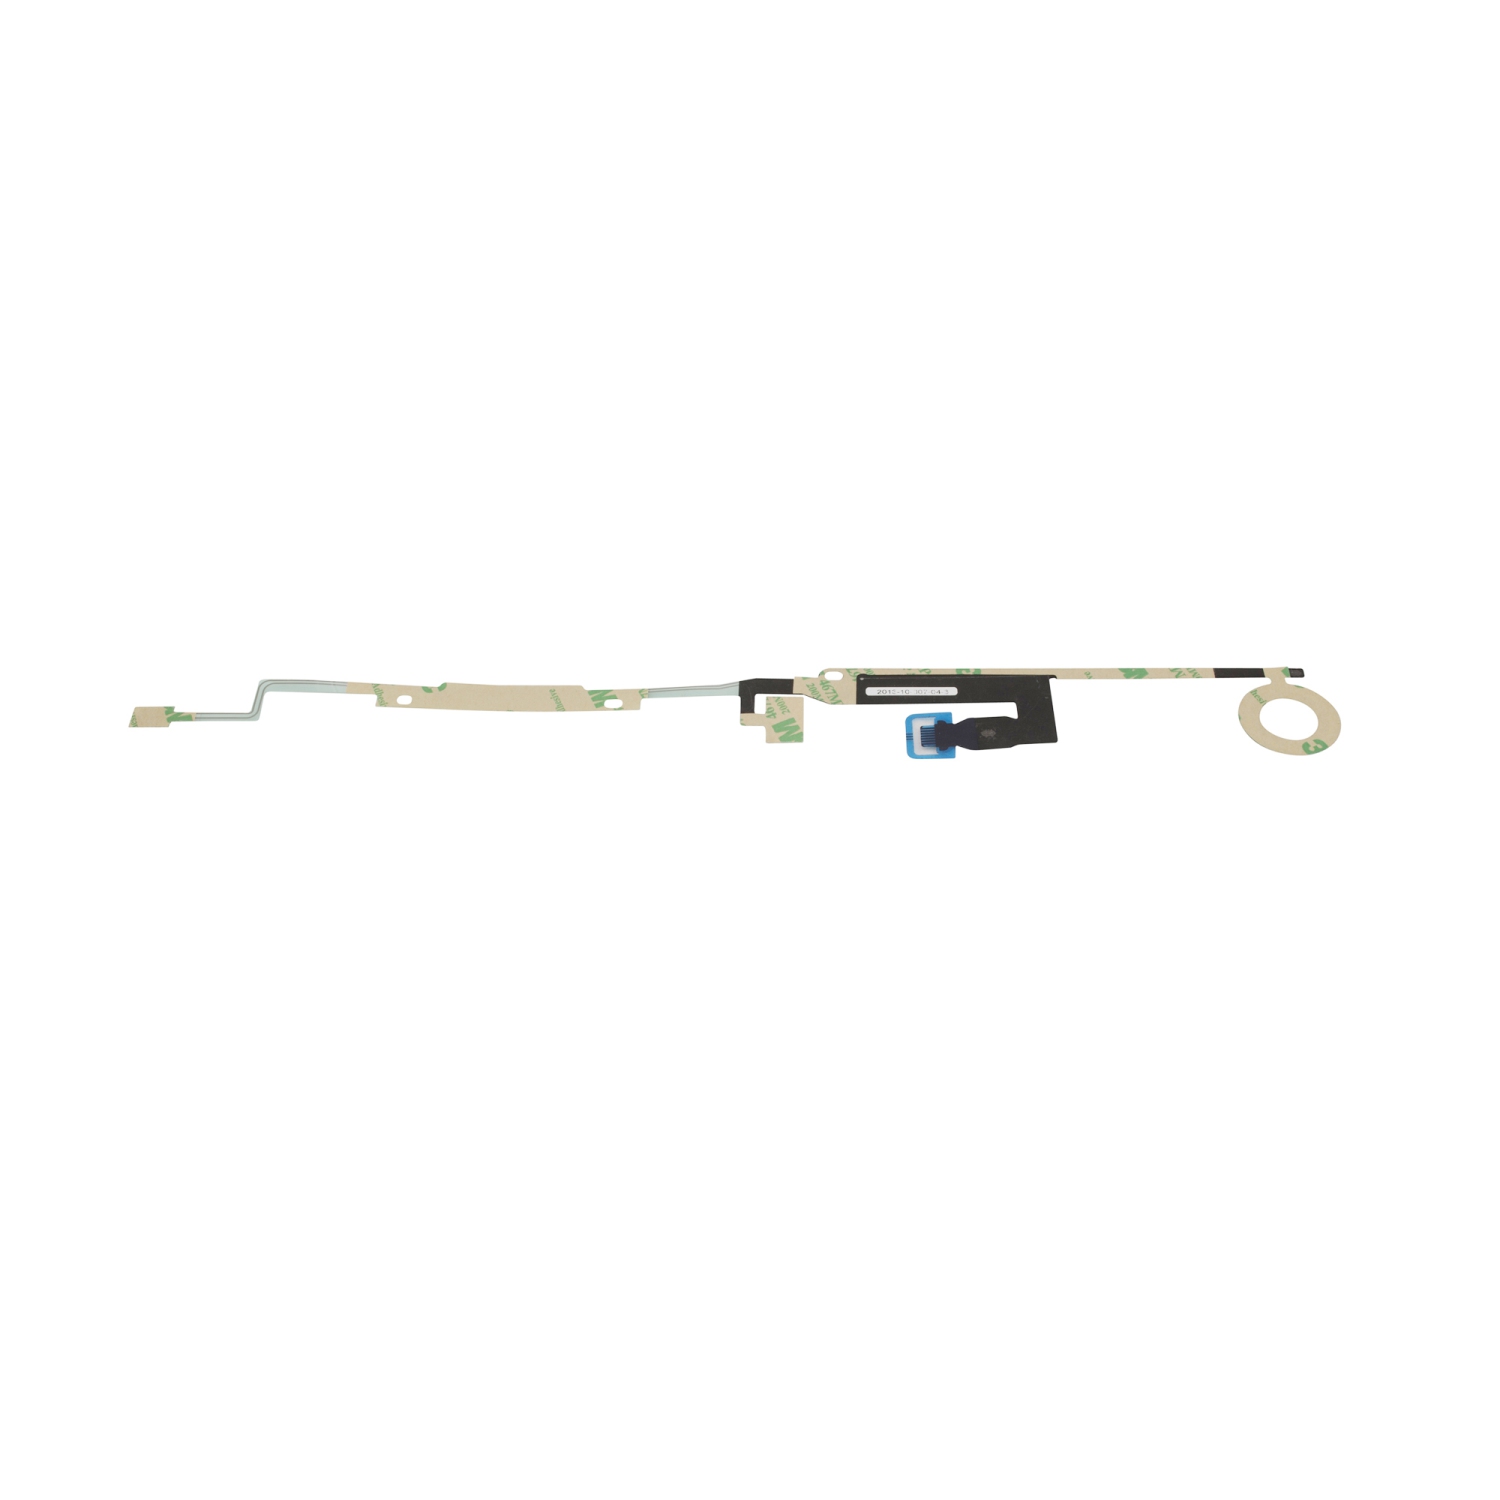 Replacement Power Switch On/Off Ribbon Flex Cable For Microsoft Xbox One